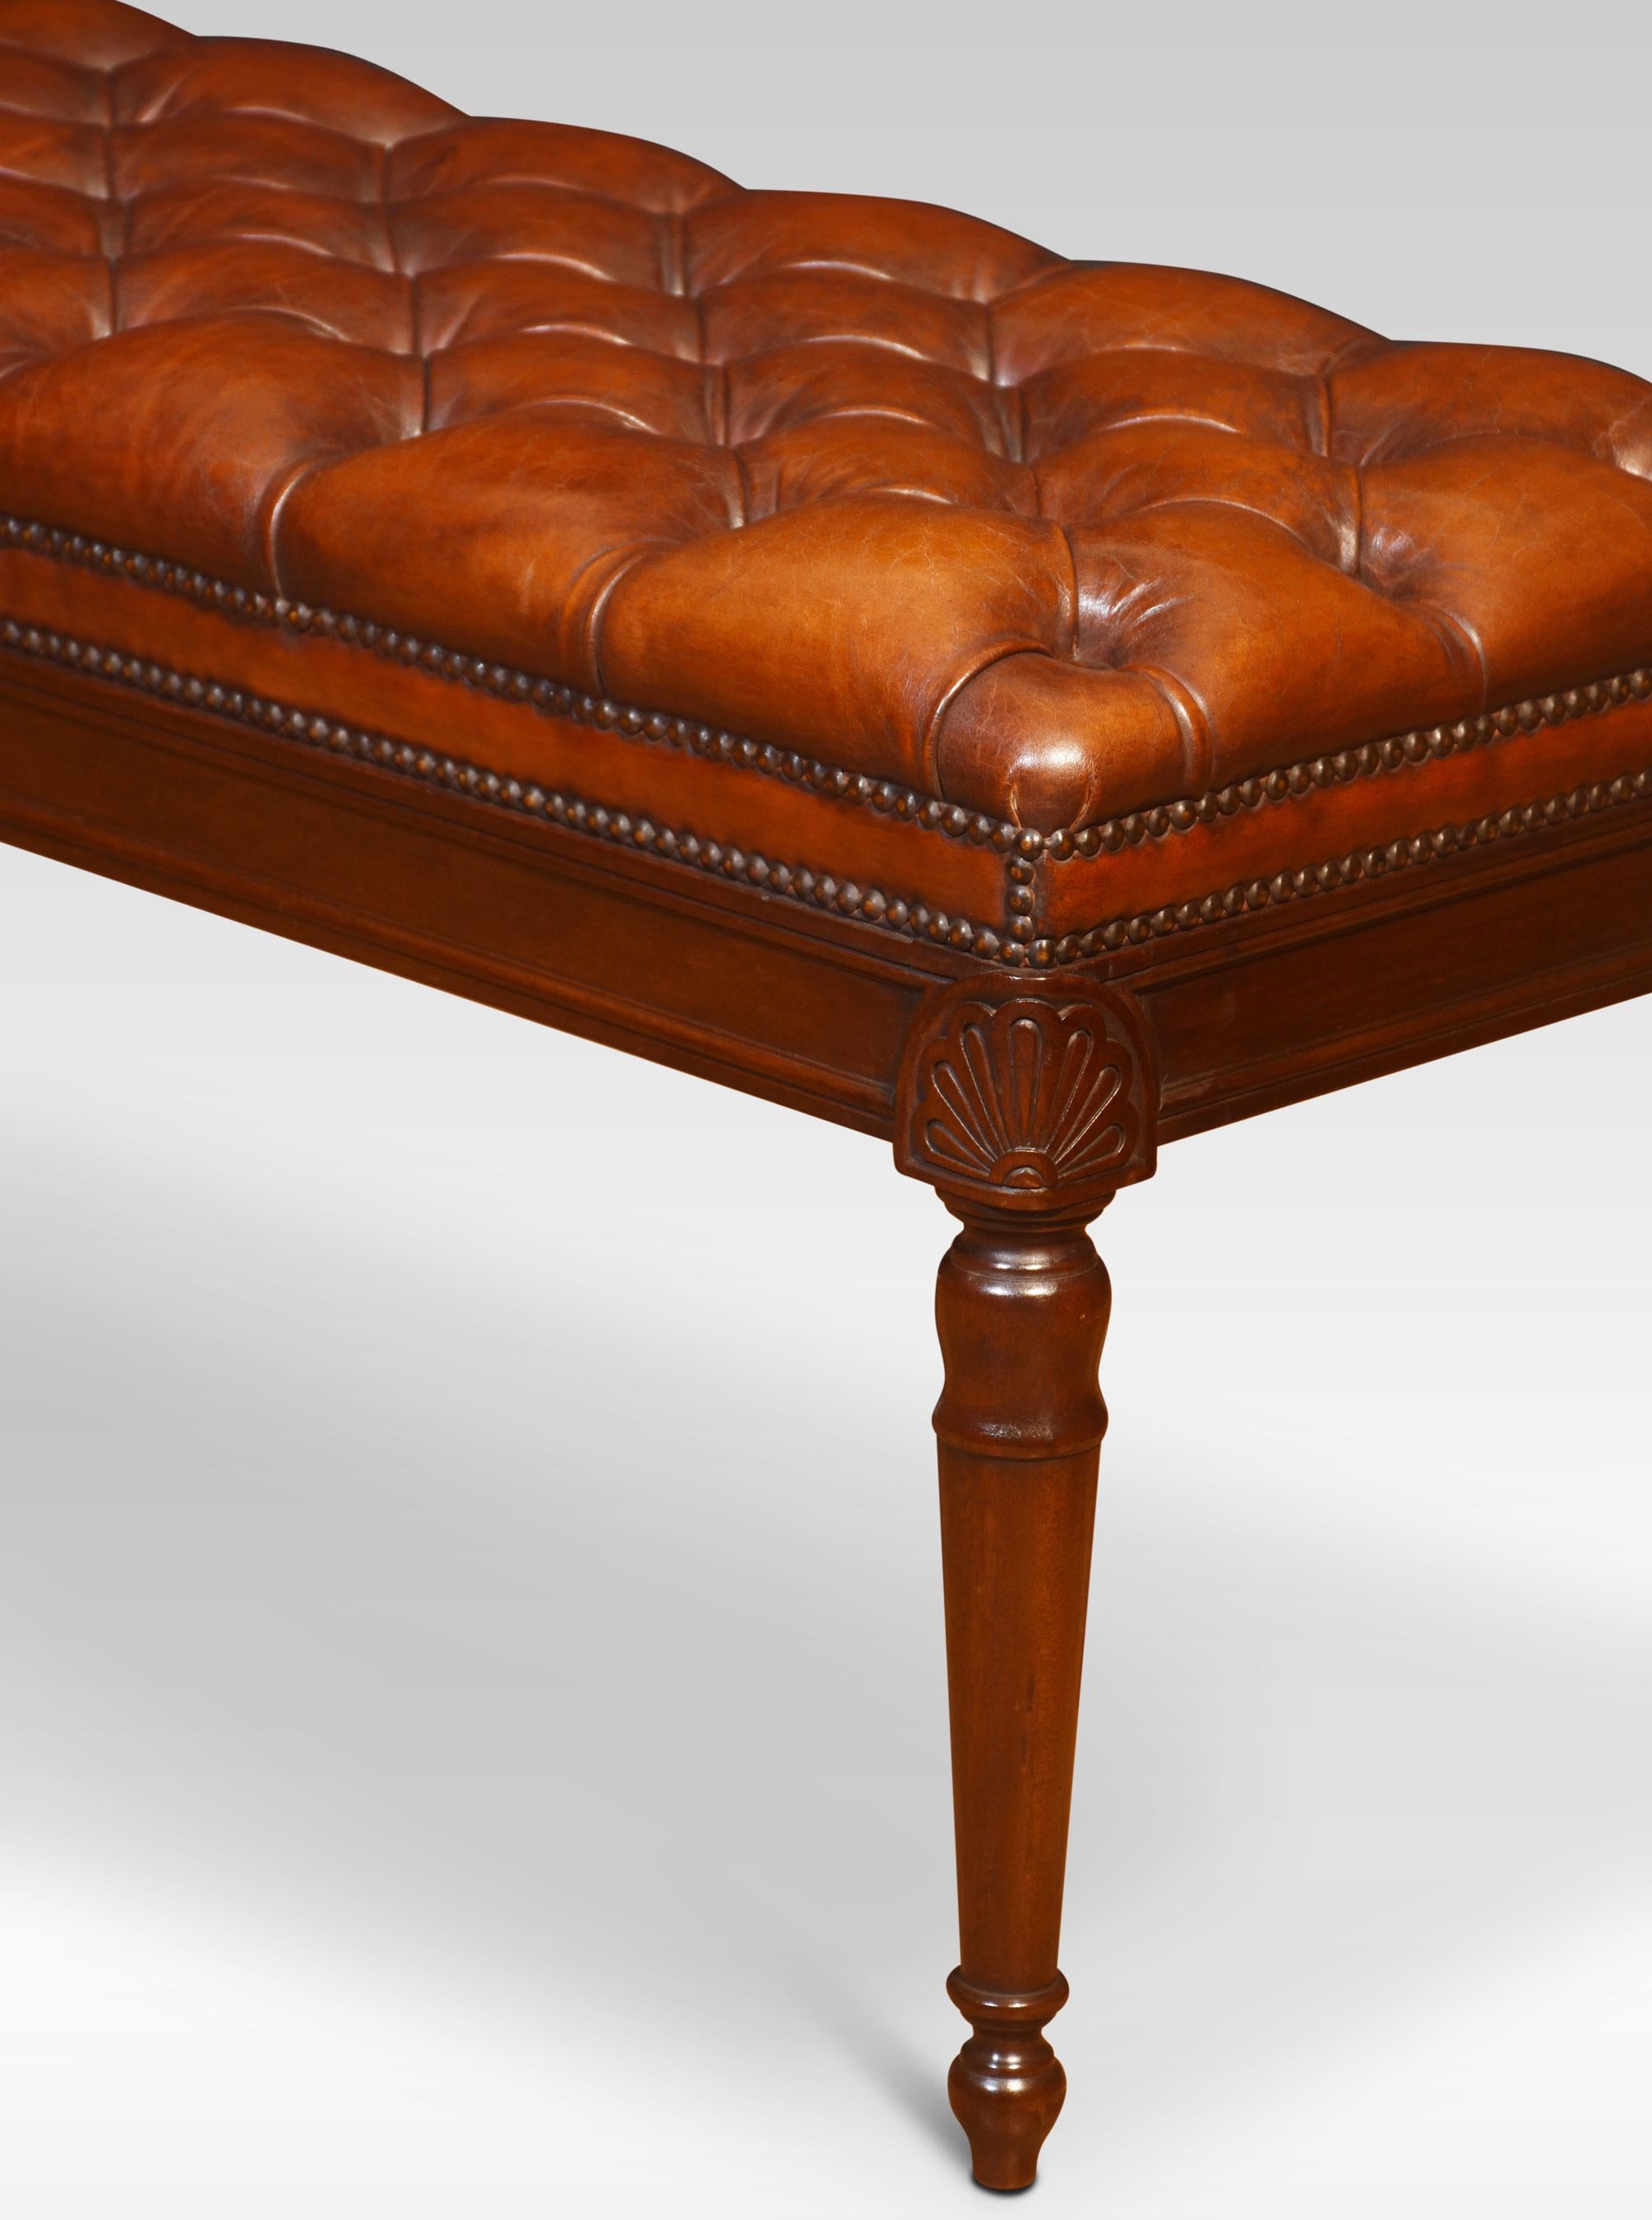 19th Century window seat, having a rectangular deep buttoned leather seat to the moulded freeze, raised up on four turned legs. The leather has been replaced and hand-dyed.
Dimensions
Height 20.5 Inches
Width 52 Inches
Depth 16.5 Inches